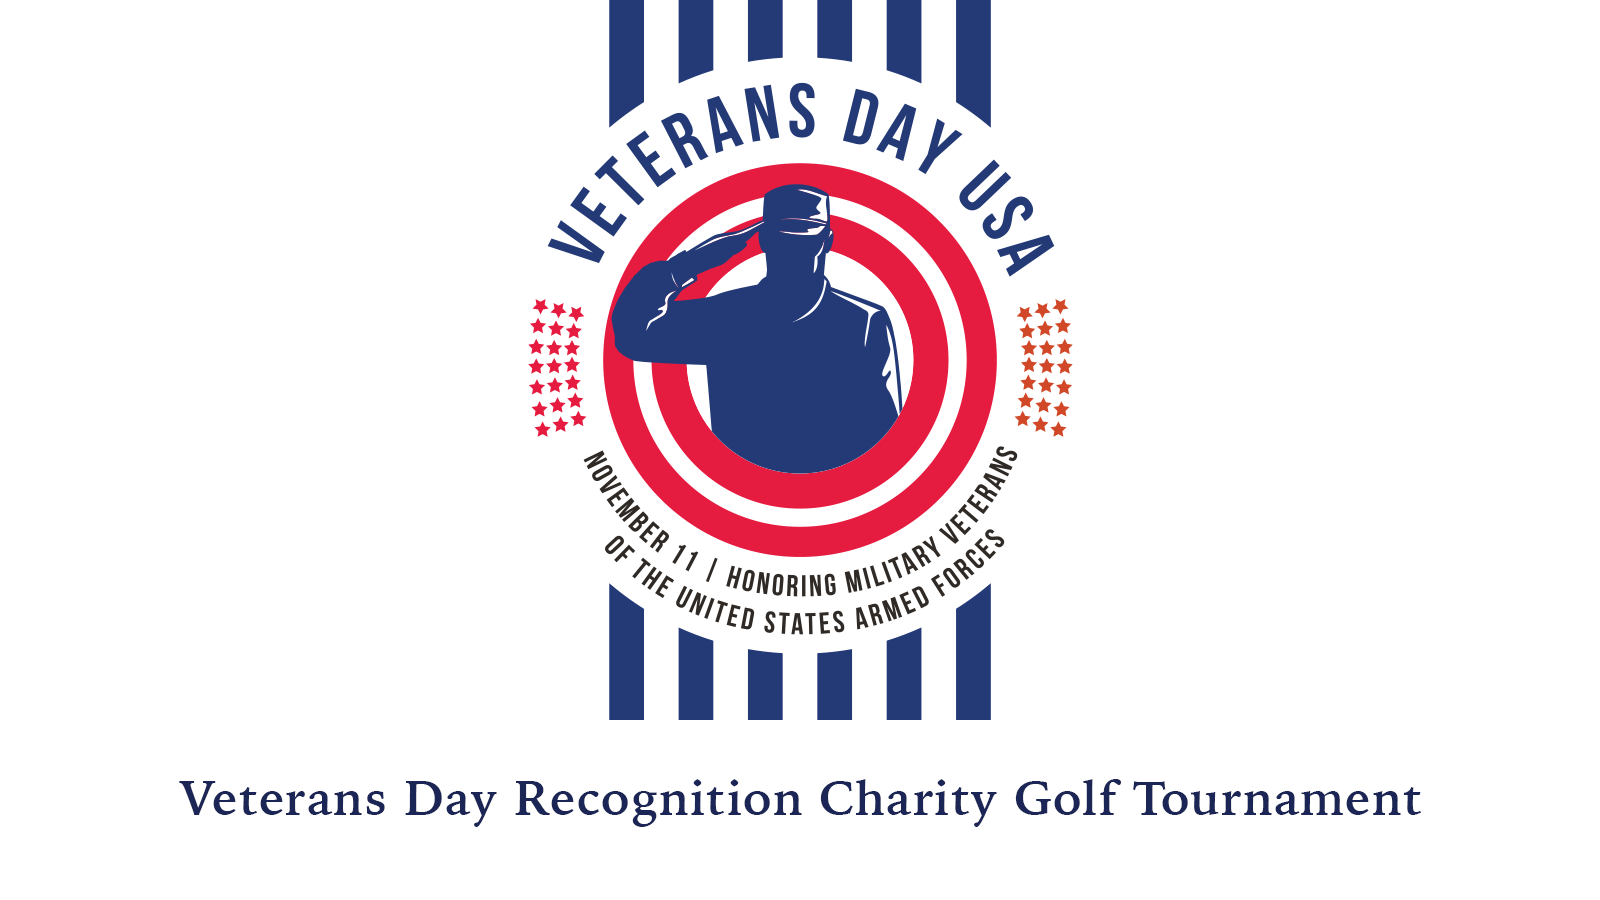 Veterans Day Recognition Charity Golf Tournament